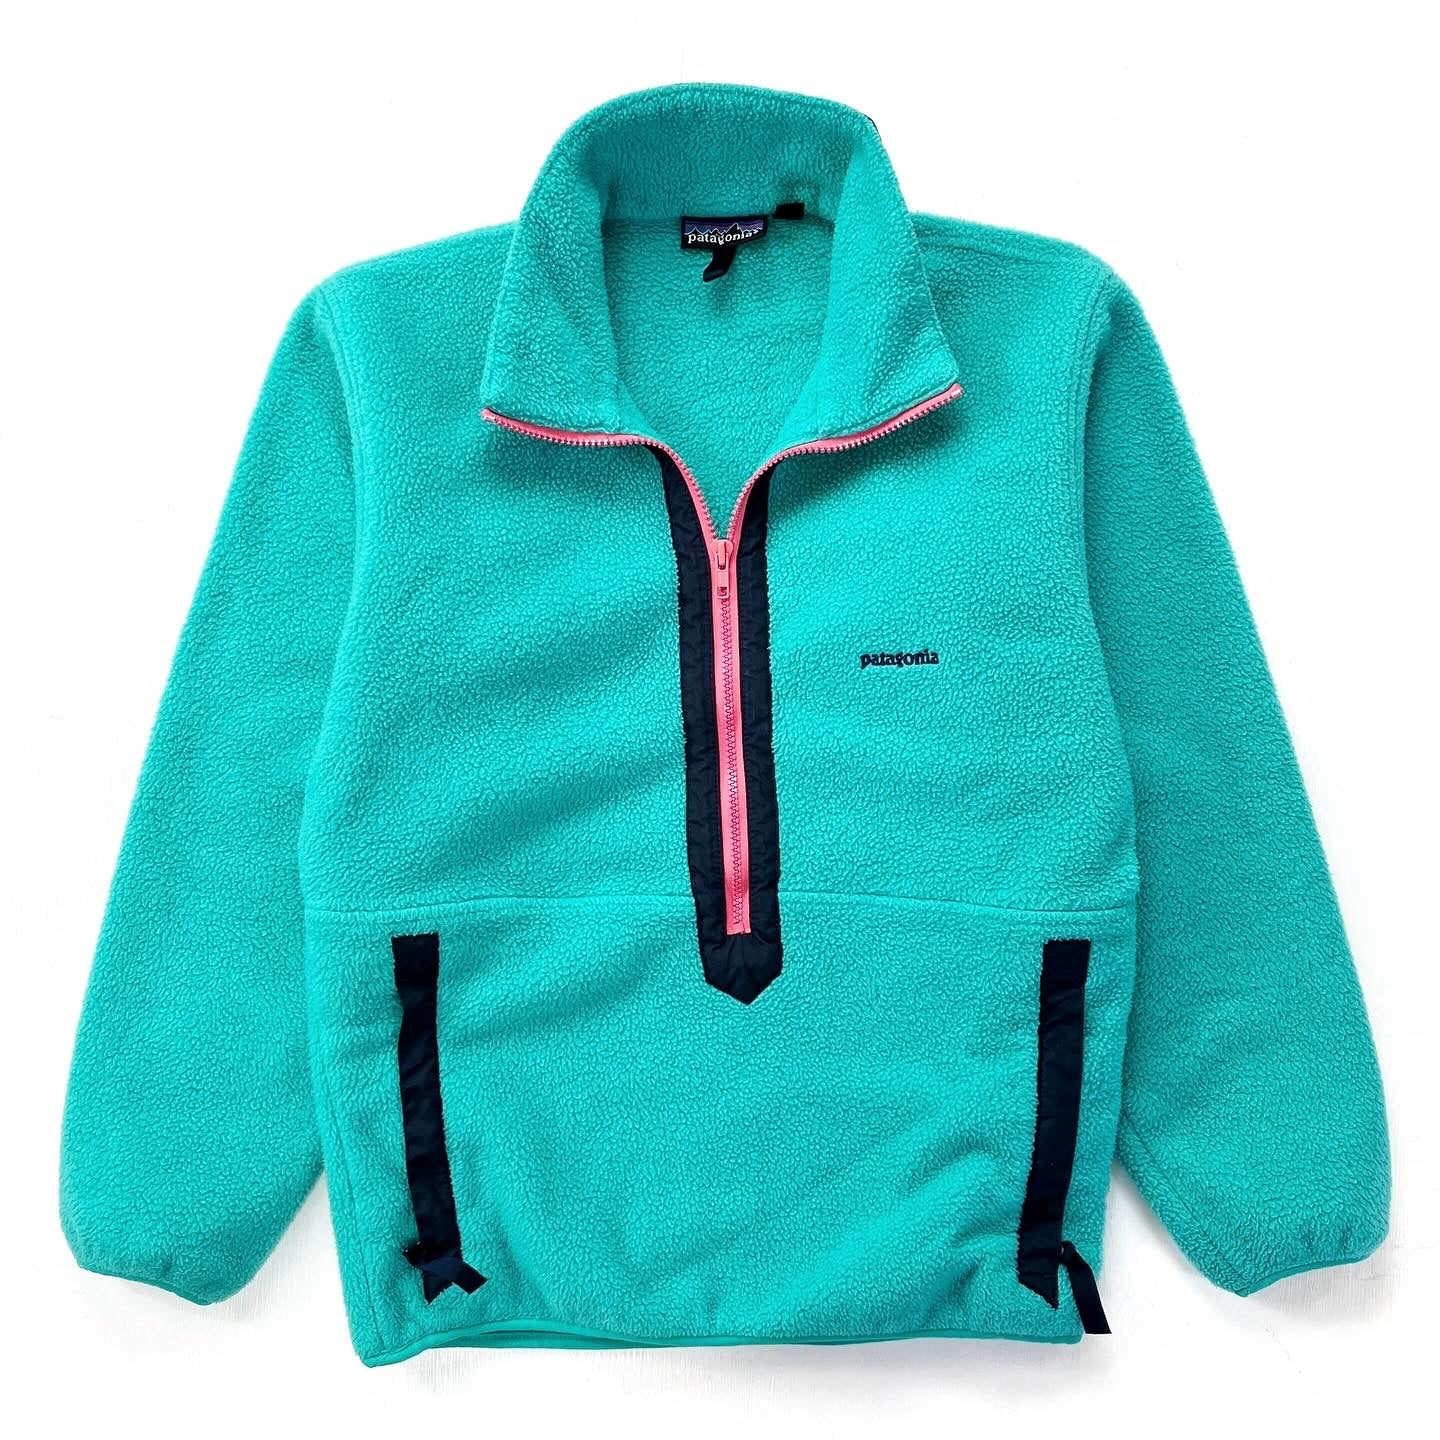 1989 Patagonia Made In The U.S.A. Half-Zip Synchilla Sweater, Teal (S)